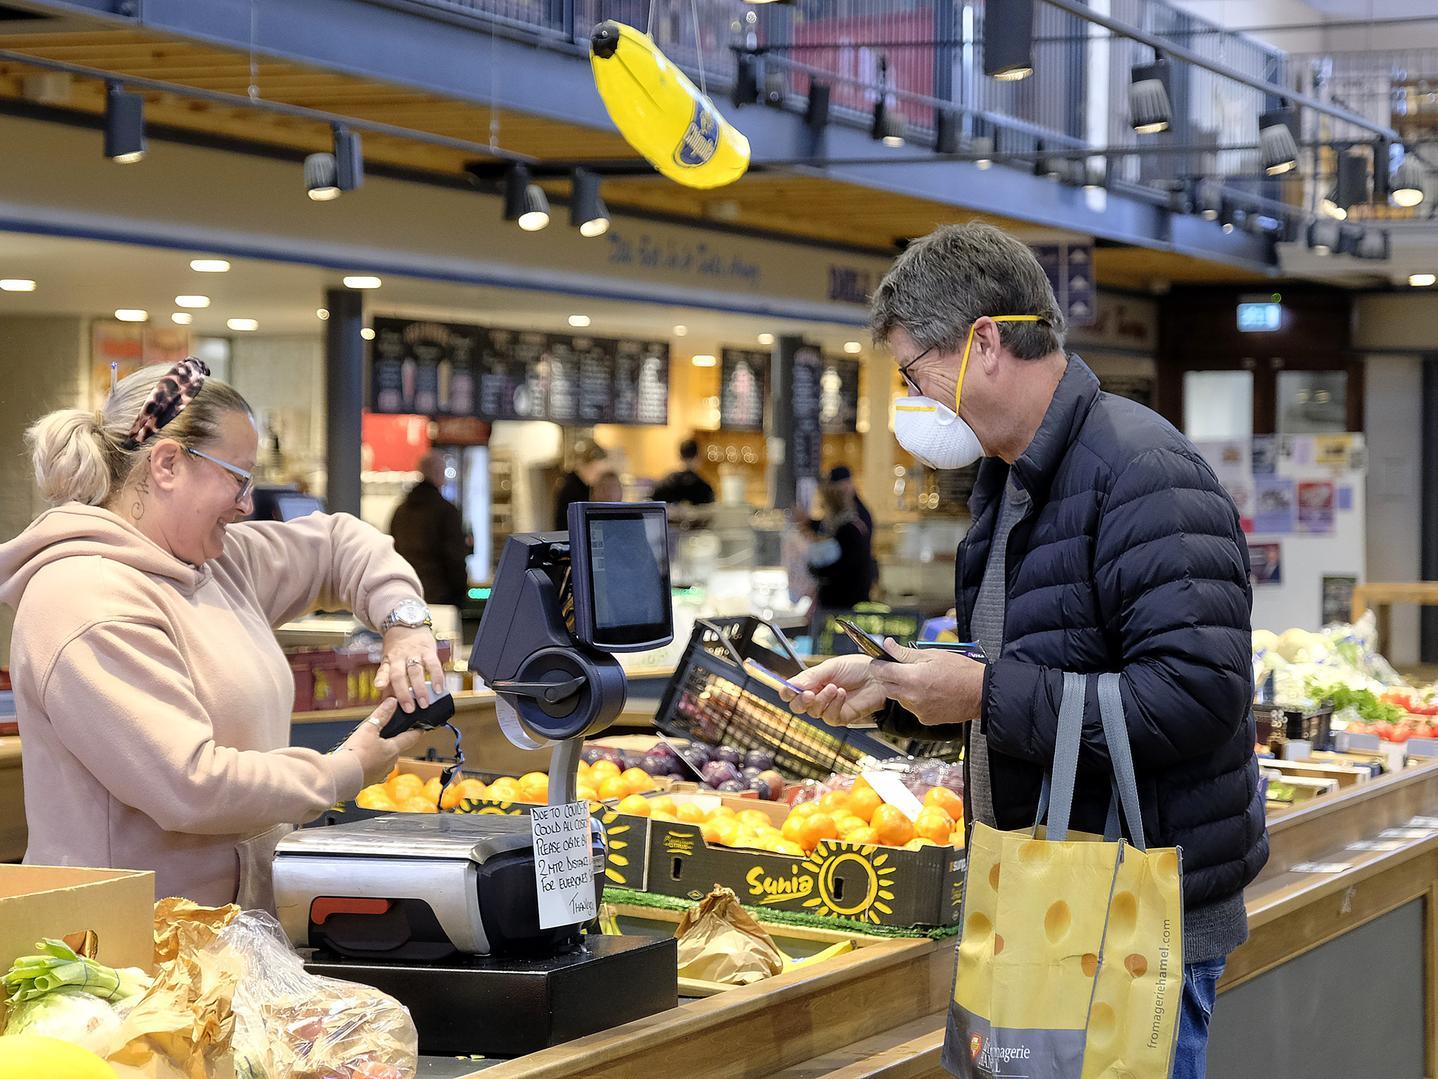 IN PICTURES: Scarborough's Indoor Market keeping us fed during virus